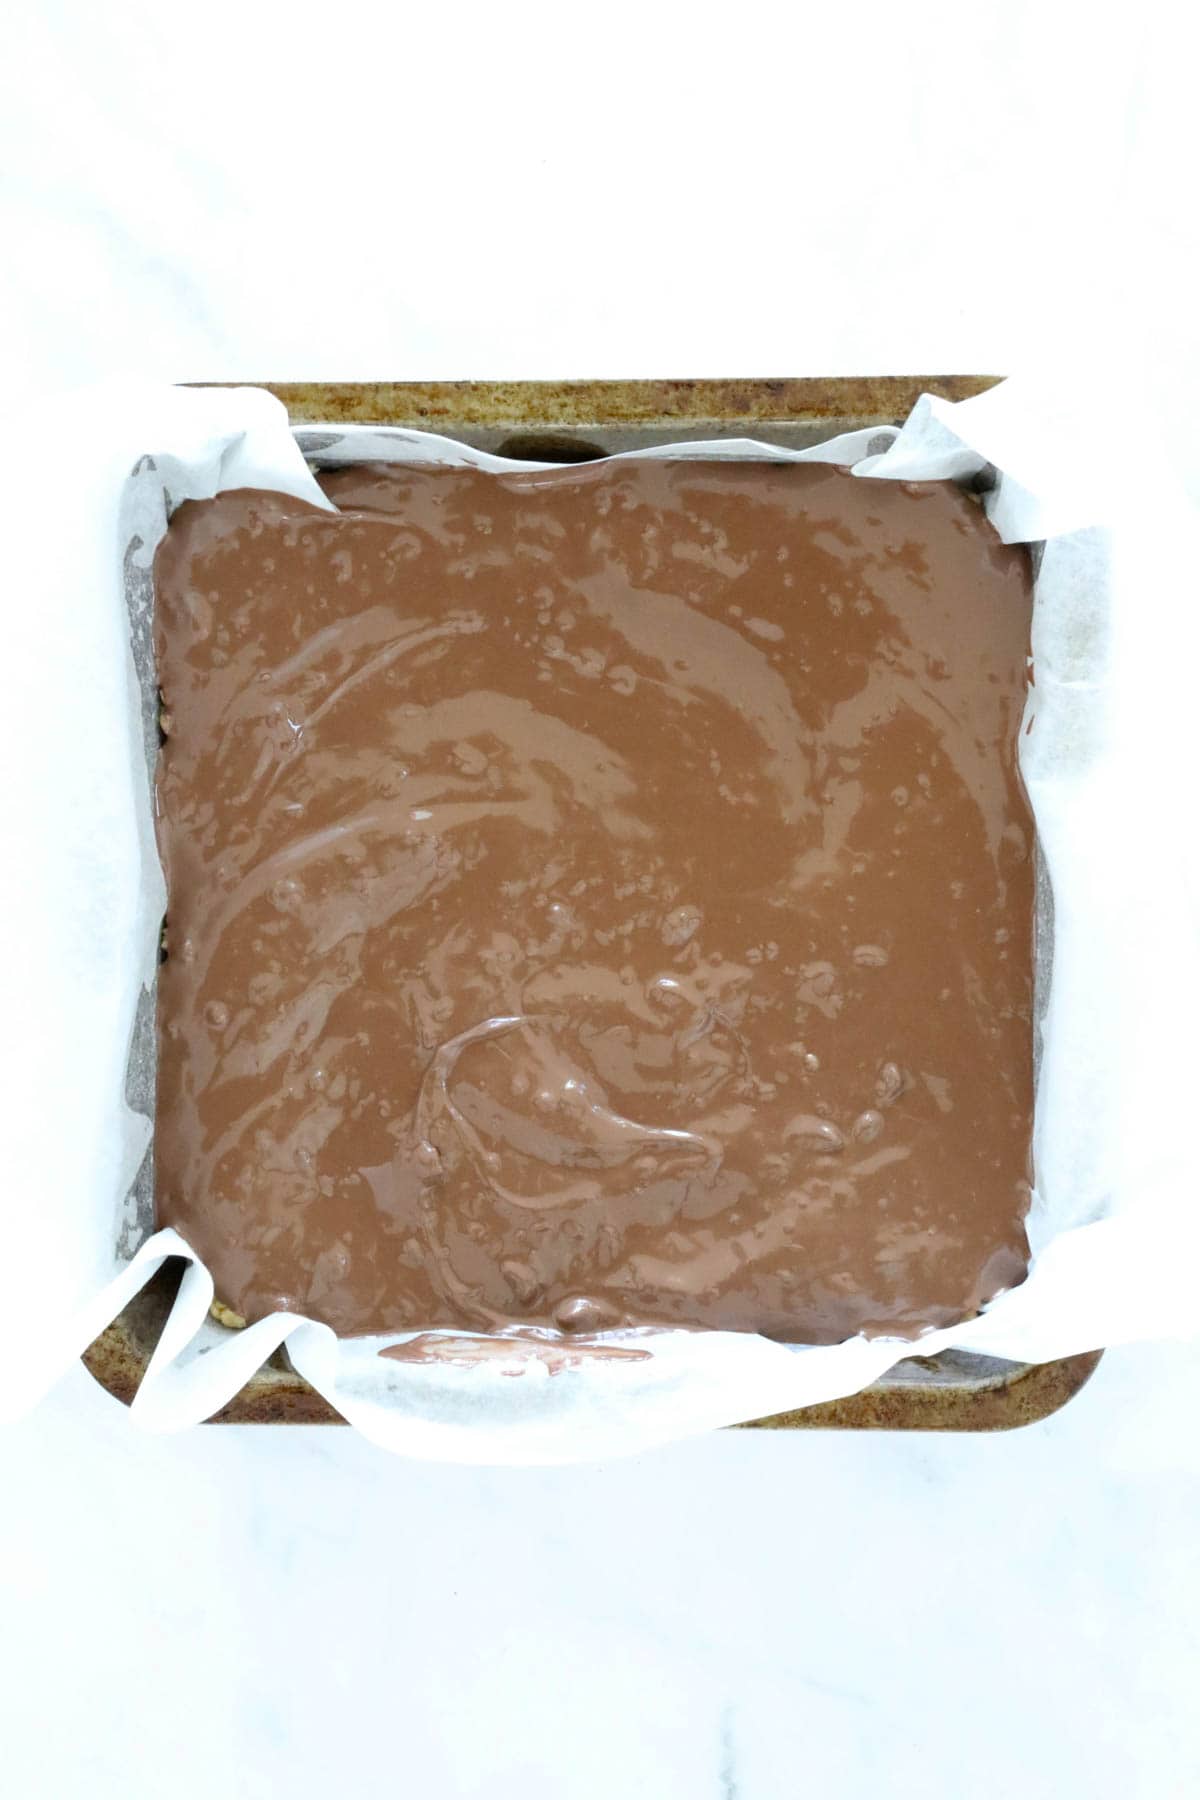 Melted chocolate in a square baking tin.